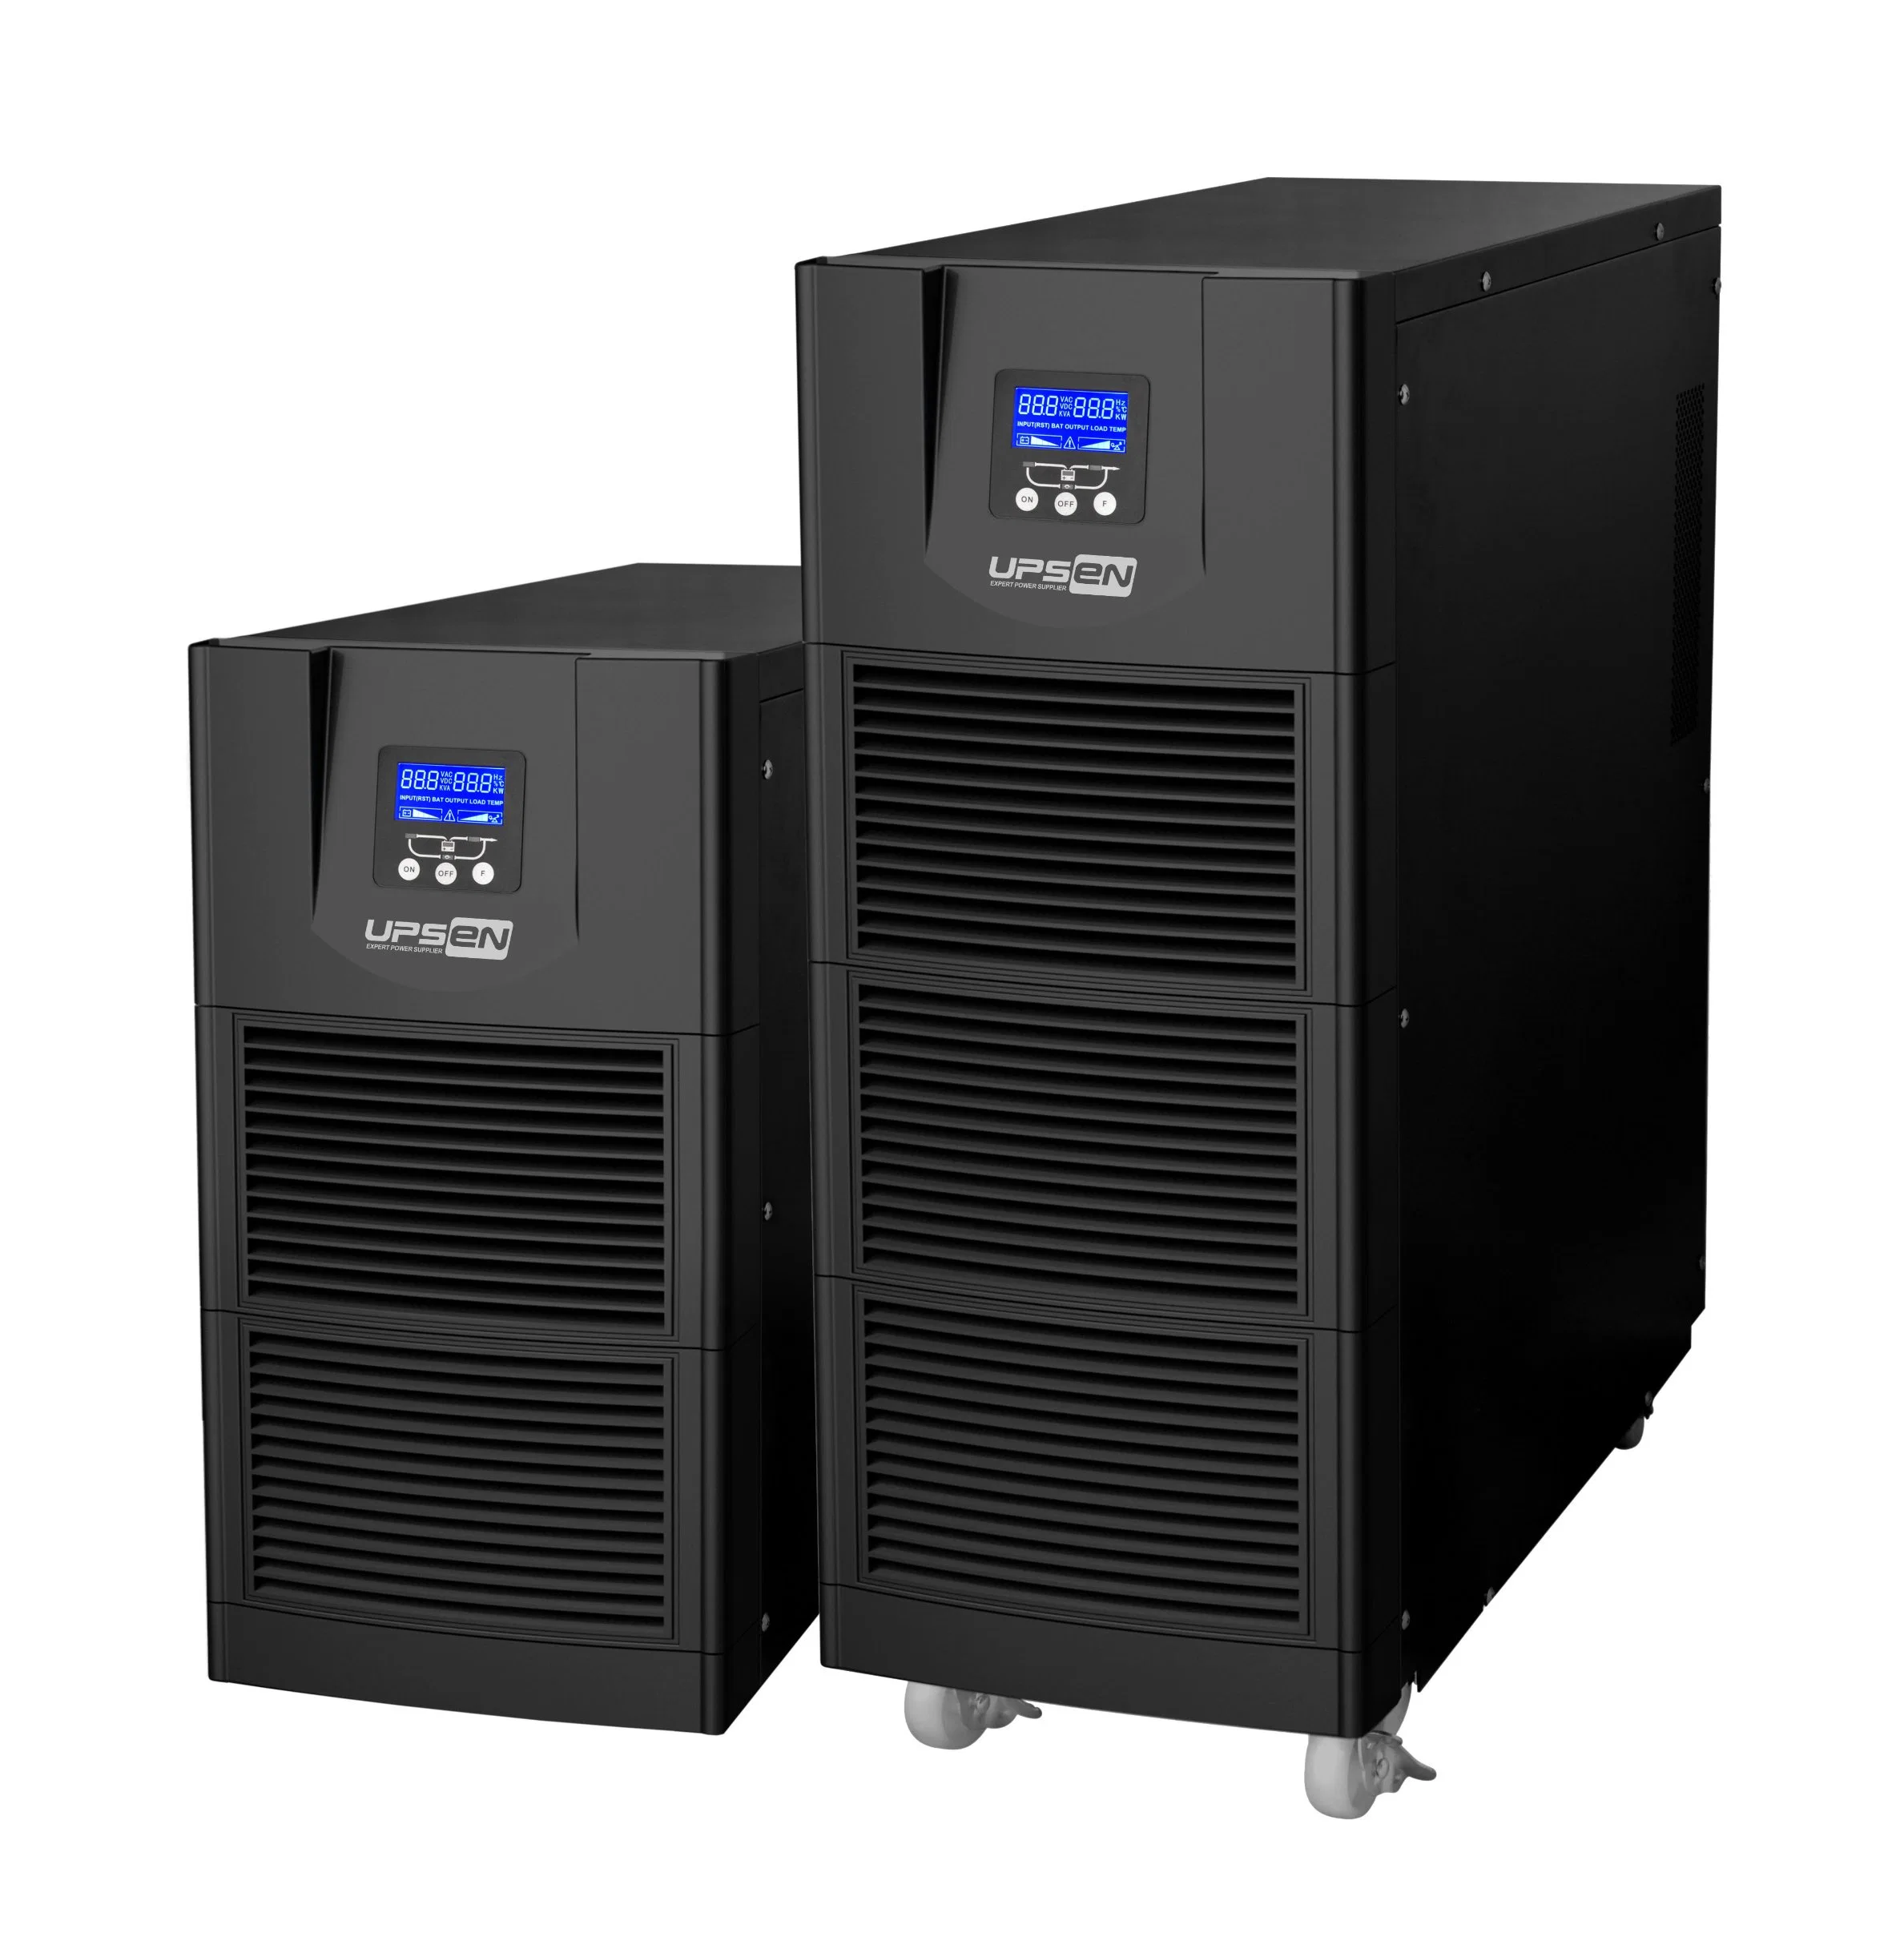 LCD Display 6 to 20kVA Pure Sine Wave High Frequency Online UPS for Elevator Escape